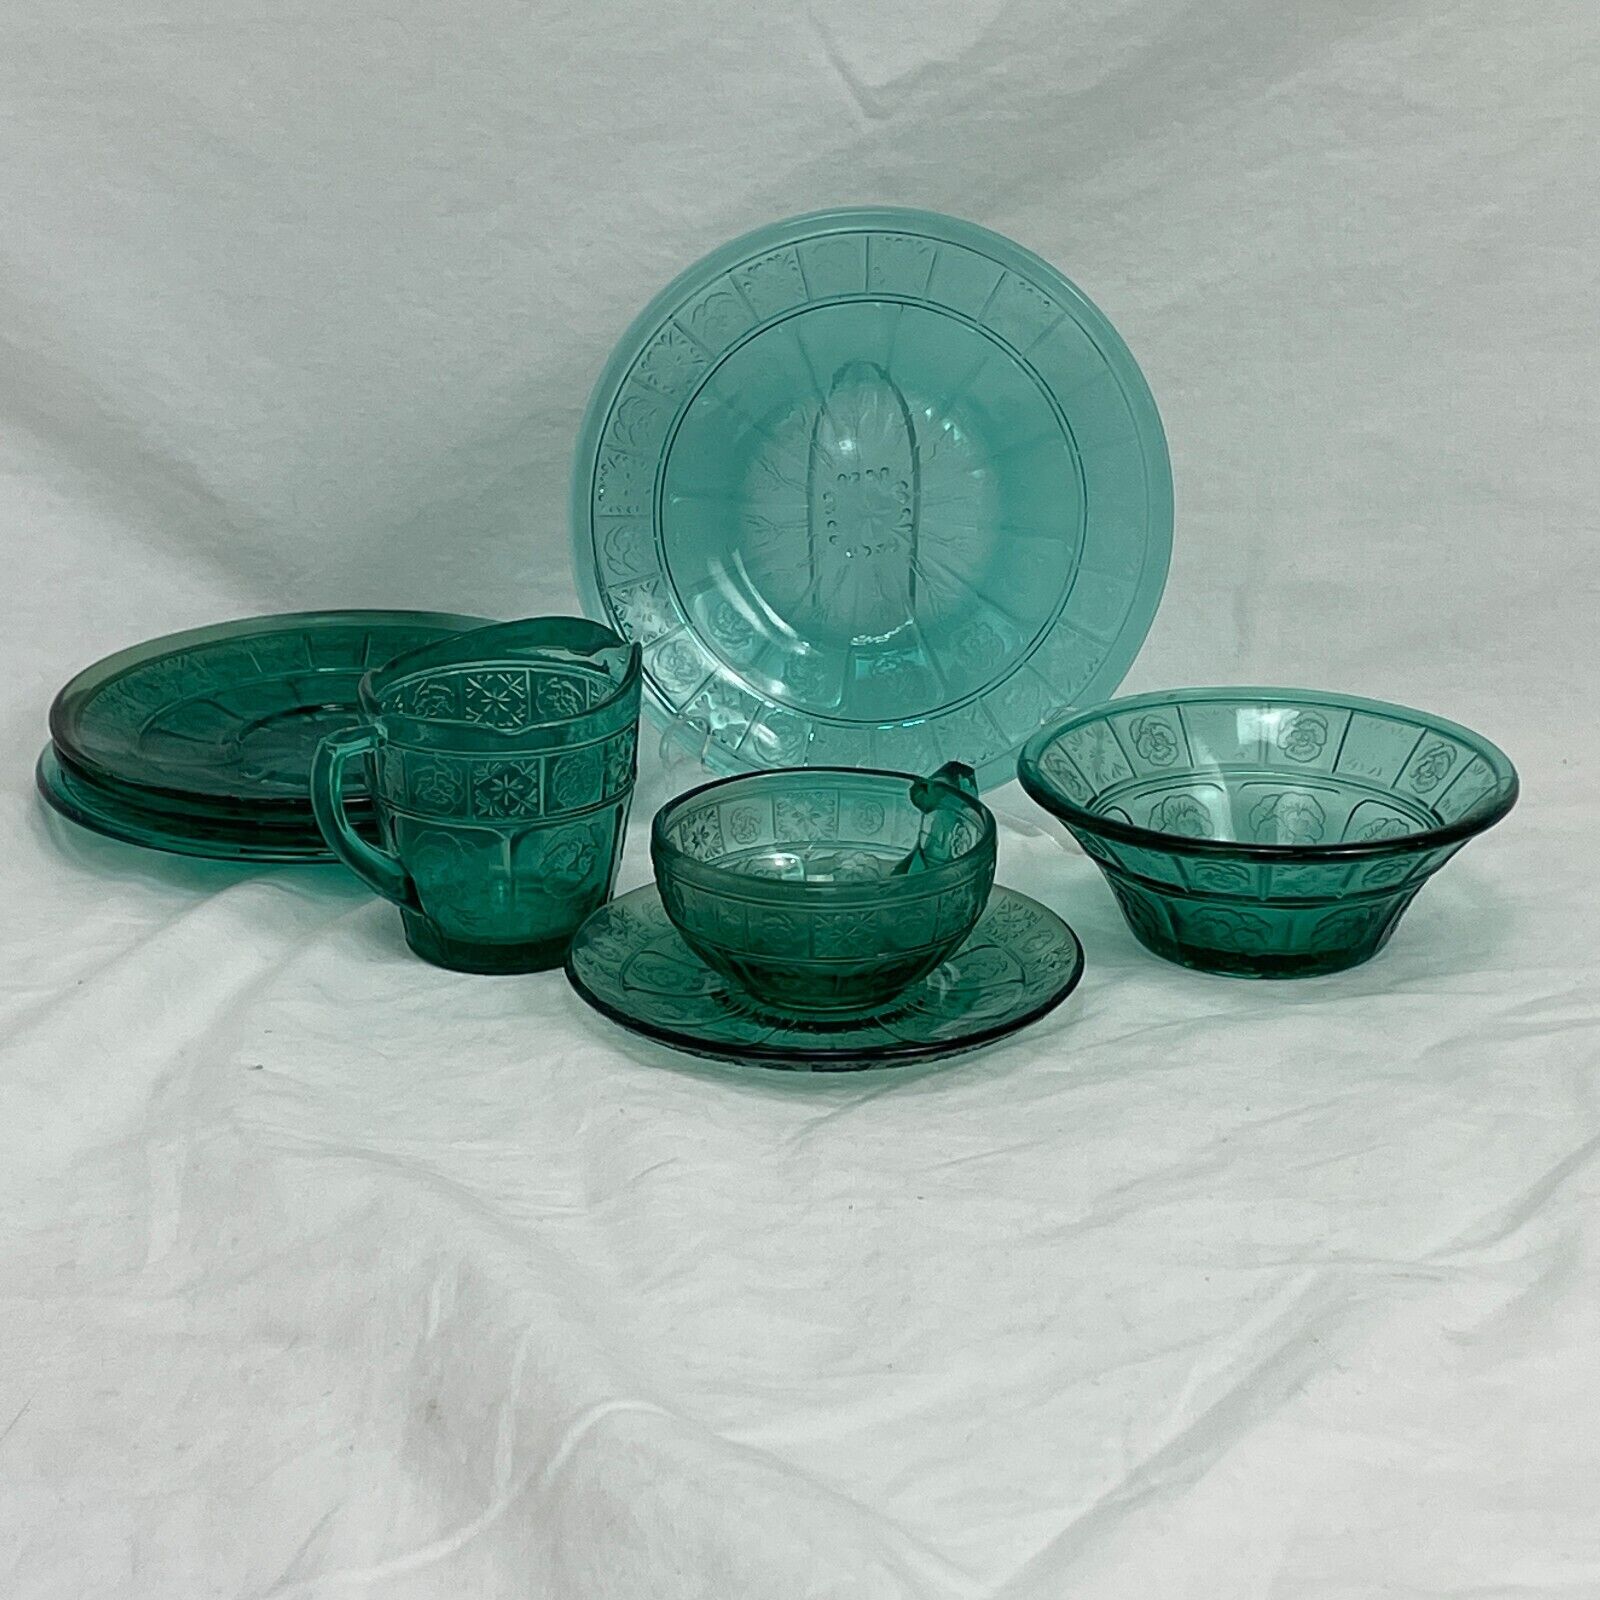 8 PC LOT JEANNETTE DORIC PANSY TEAL CHILD CUP SAUCER BERRY BOWL BREAD PLATES